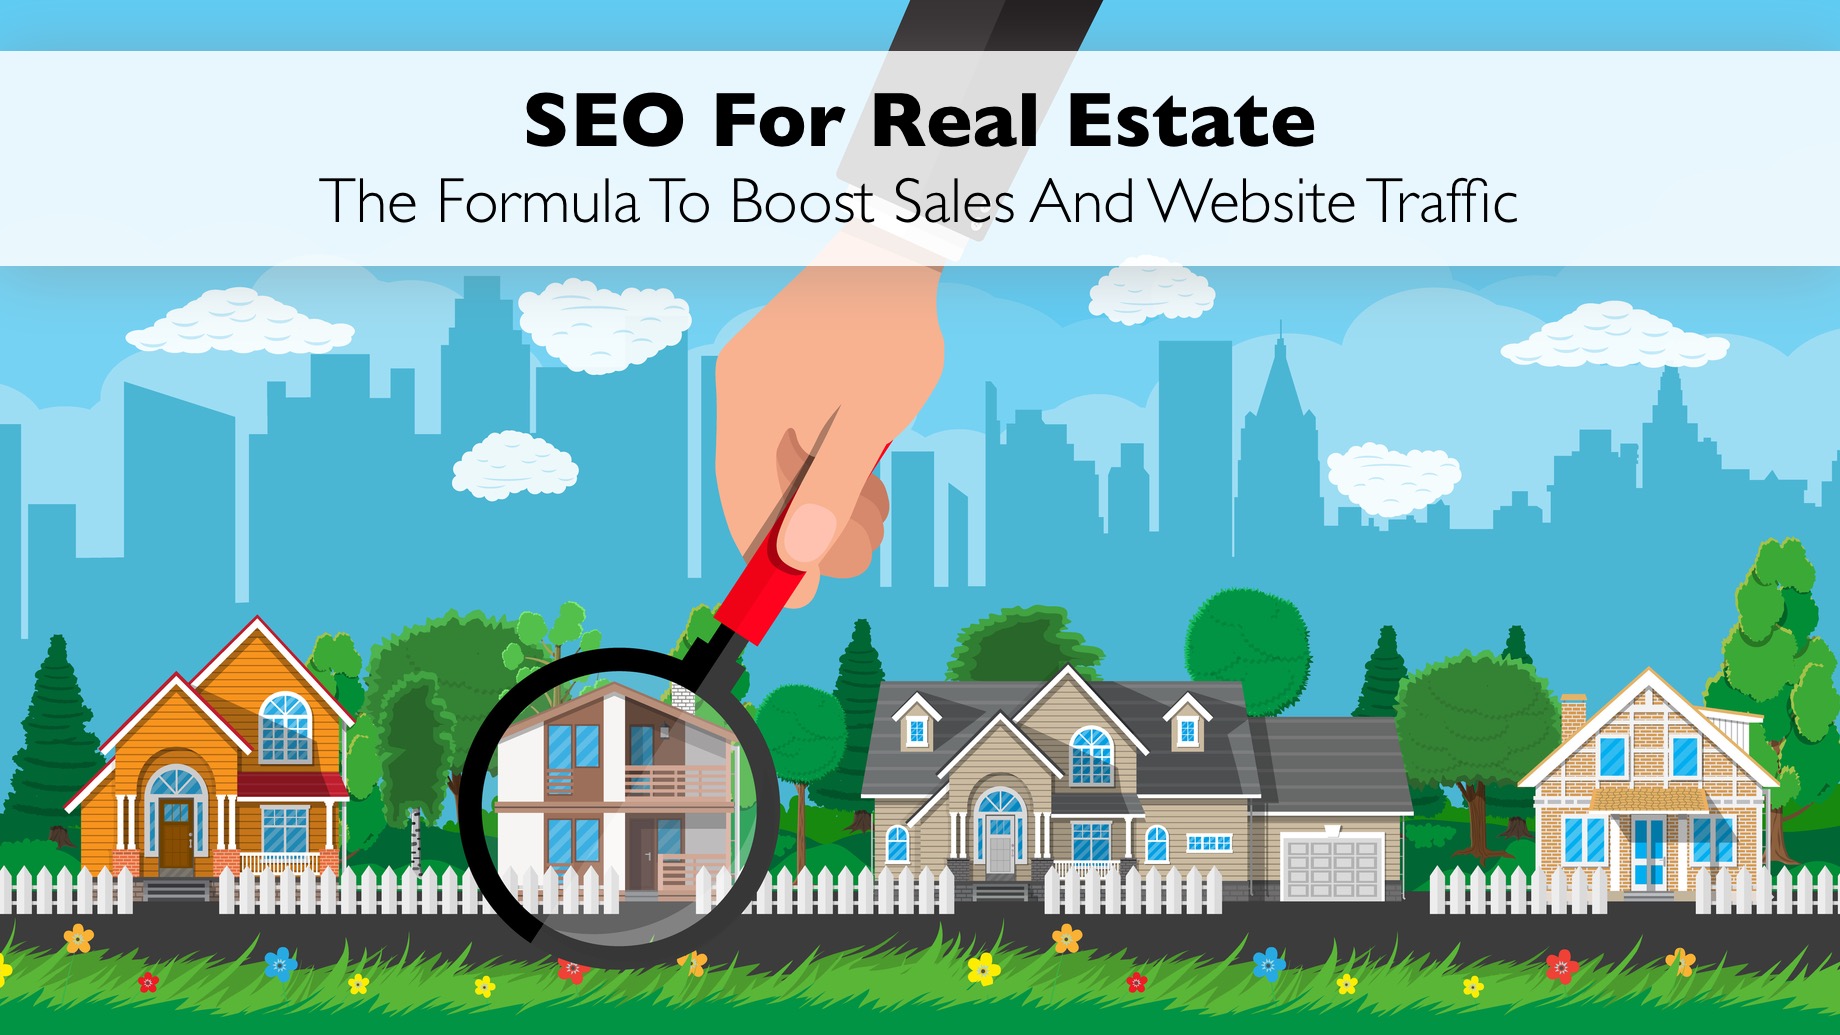 SEO For Real Estate - The Formula To Boost Sales And Website Traffic